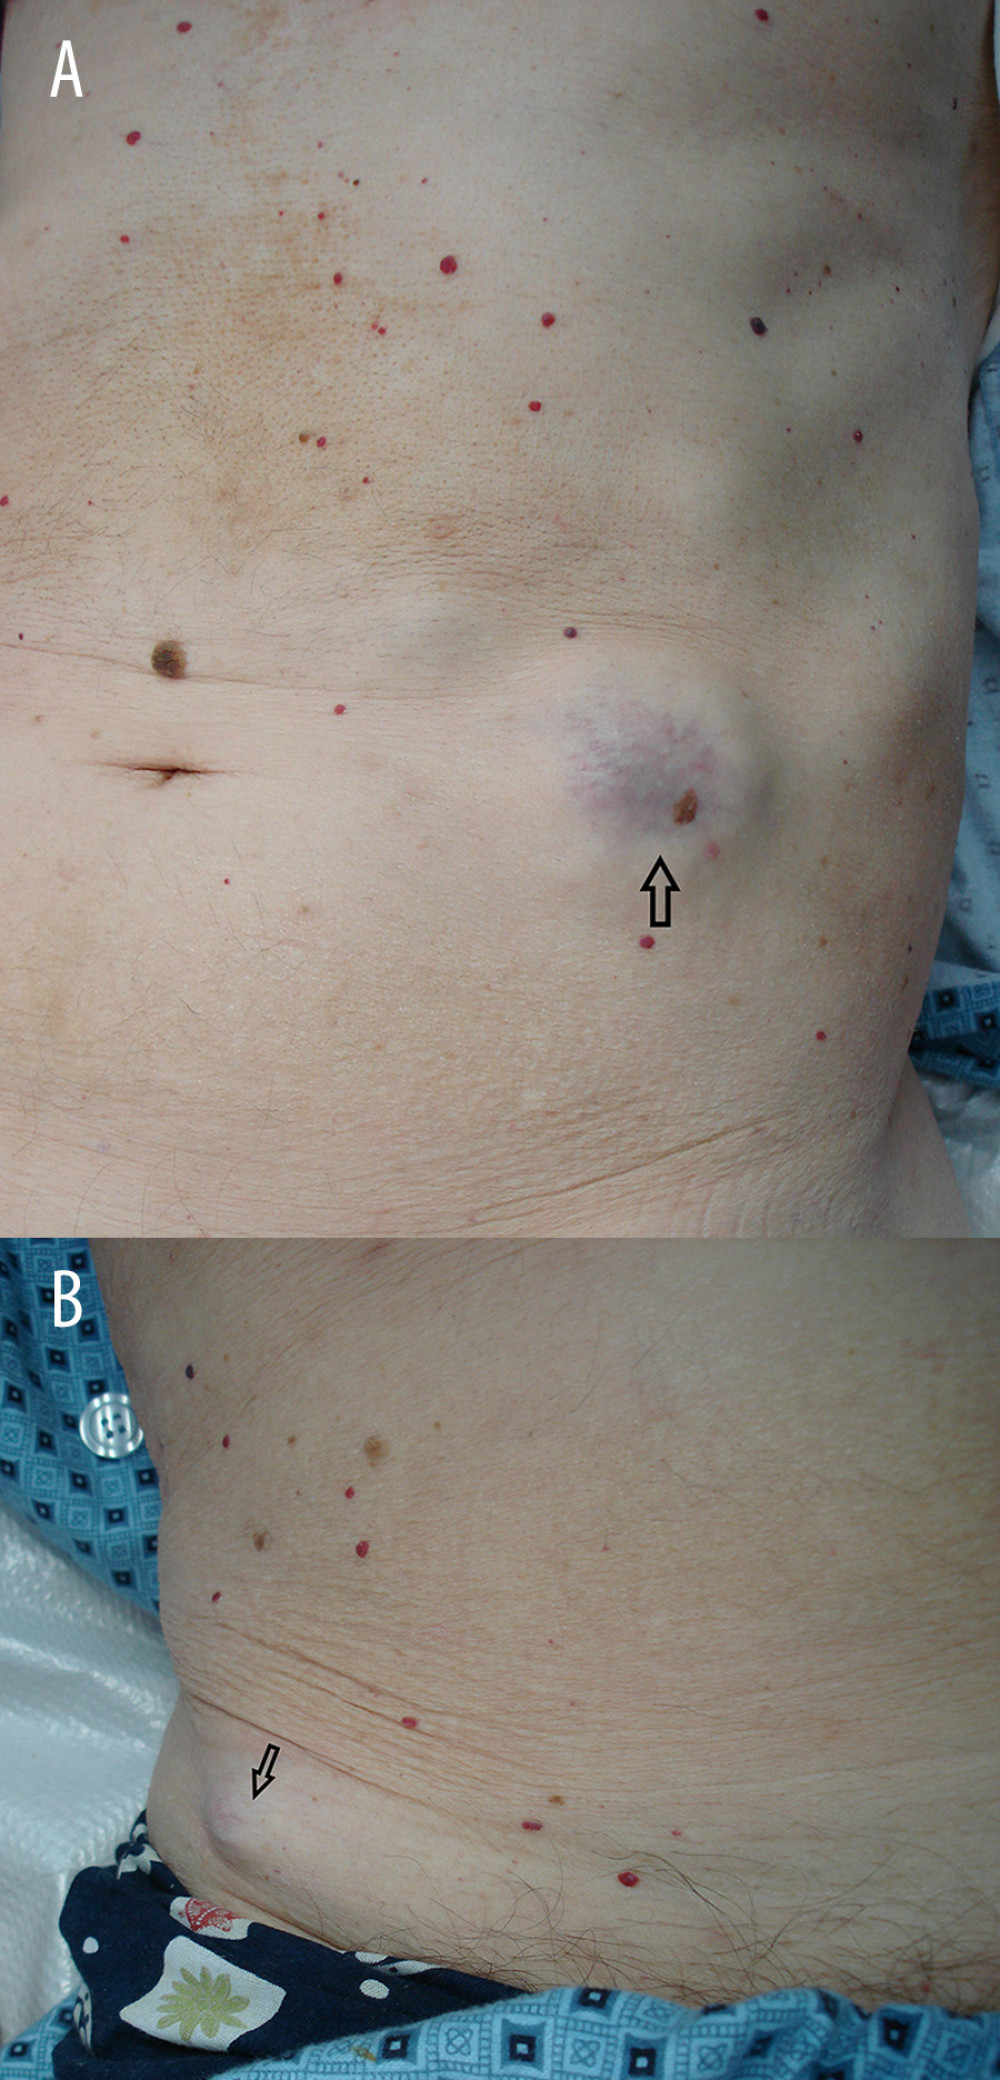 (A, B) The skin lesions on the left lumbar region and on the right iliac region.